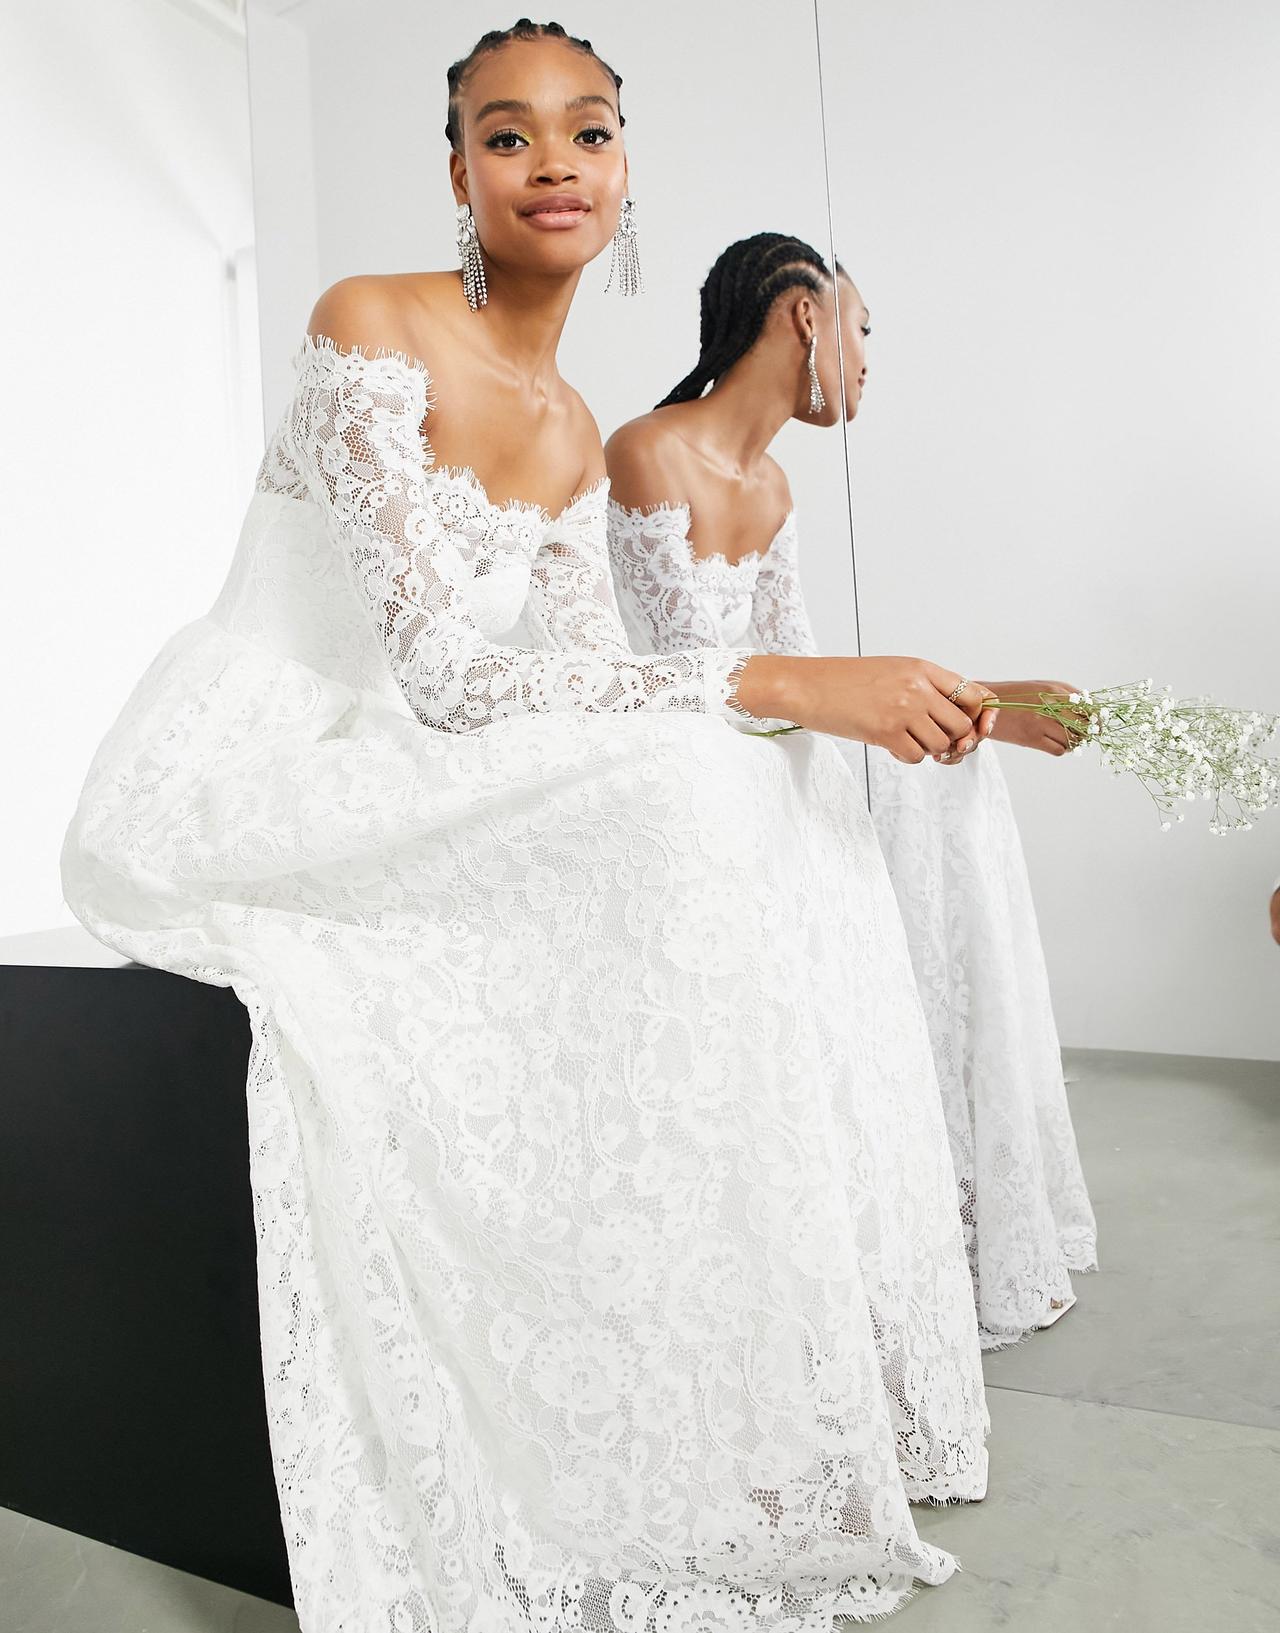 Model wearing an off the shoulder lace wedding dress